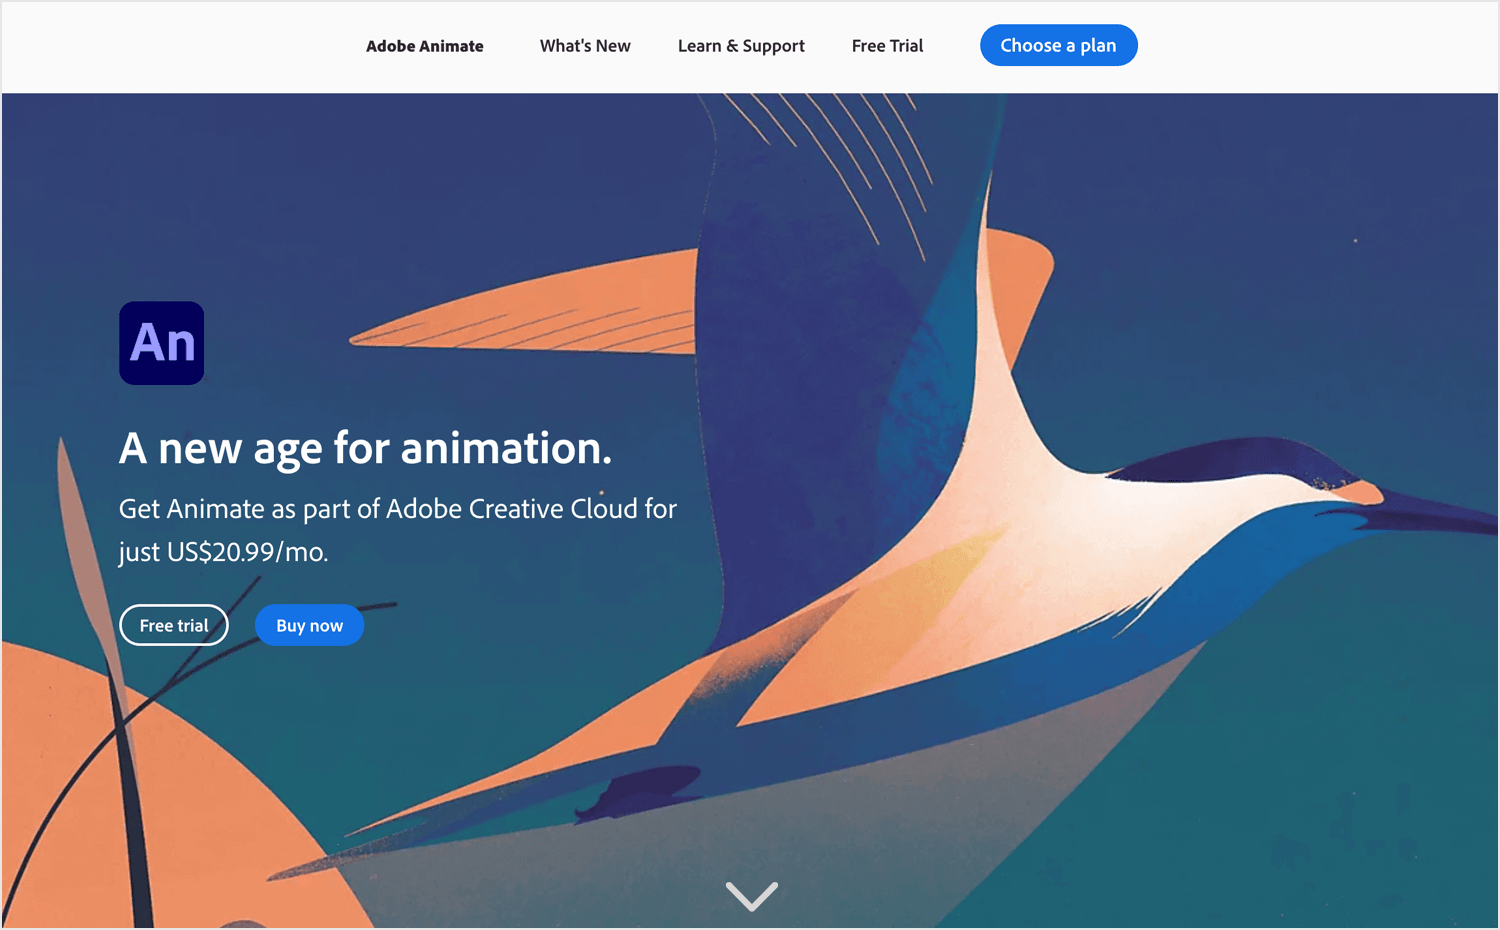 free gif animation software for mac